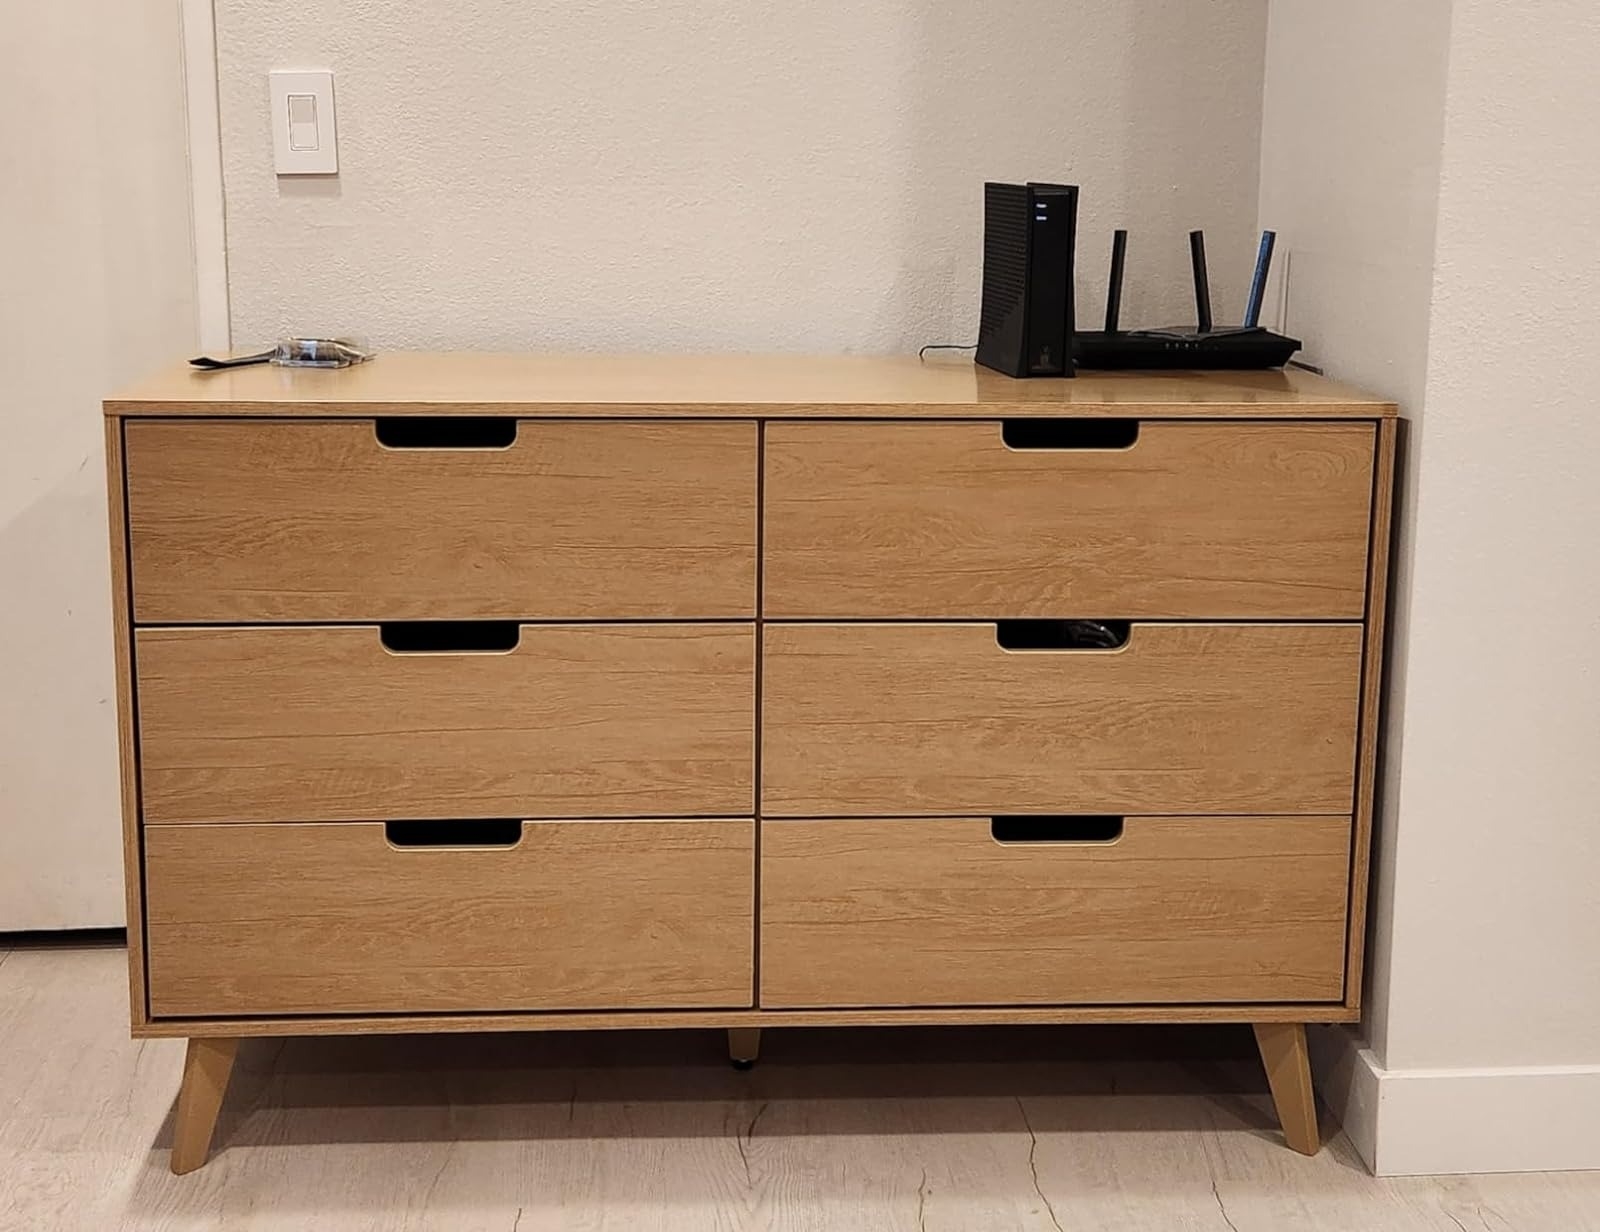 A modern wooden dresser with six drawers, a router and modem on top in a simple room